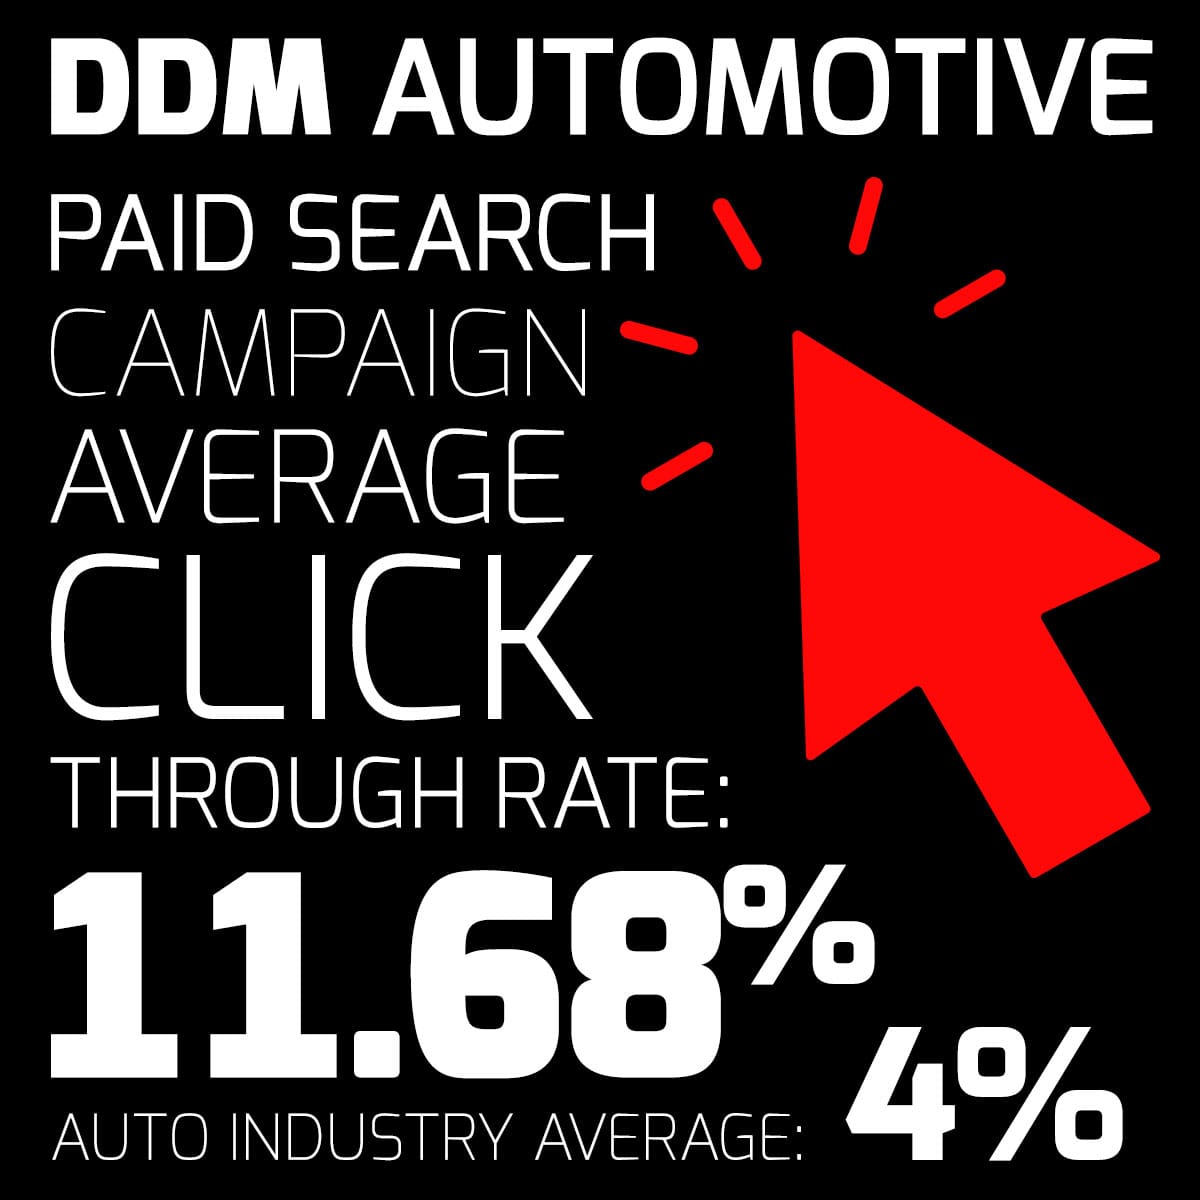 DDM Automotive Paid Search Campaign Average Click Through Rate: 11.68%. Auto Industry Average: 4%